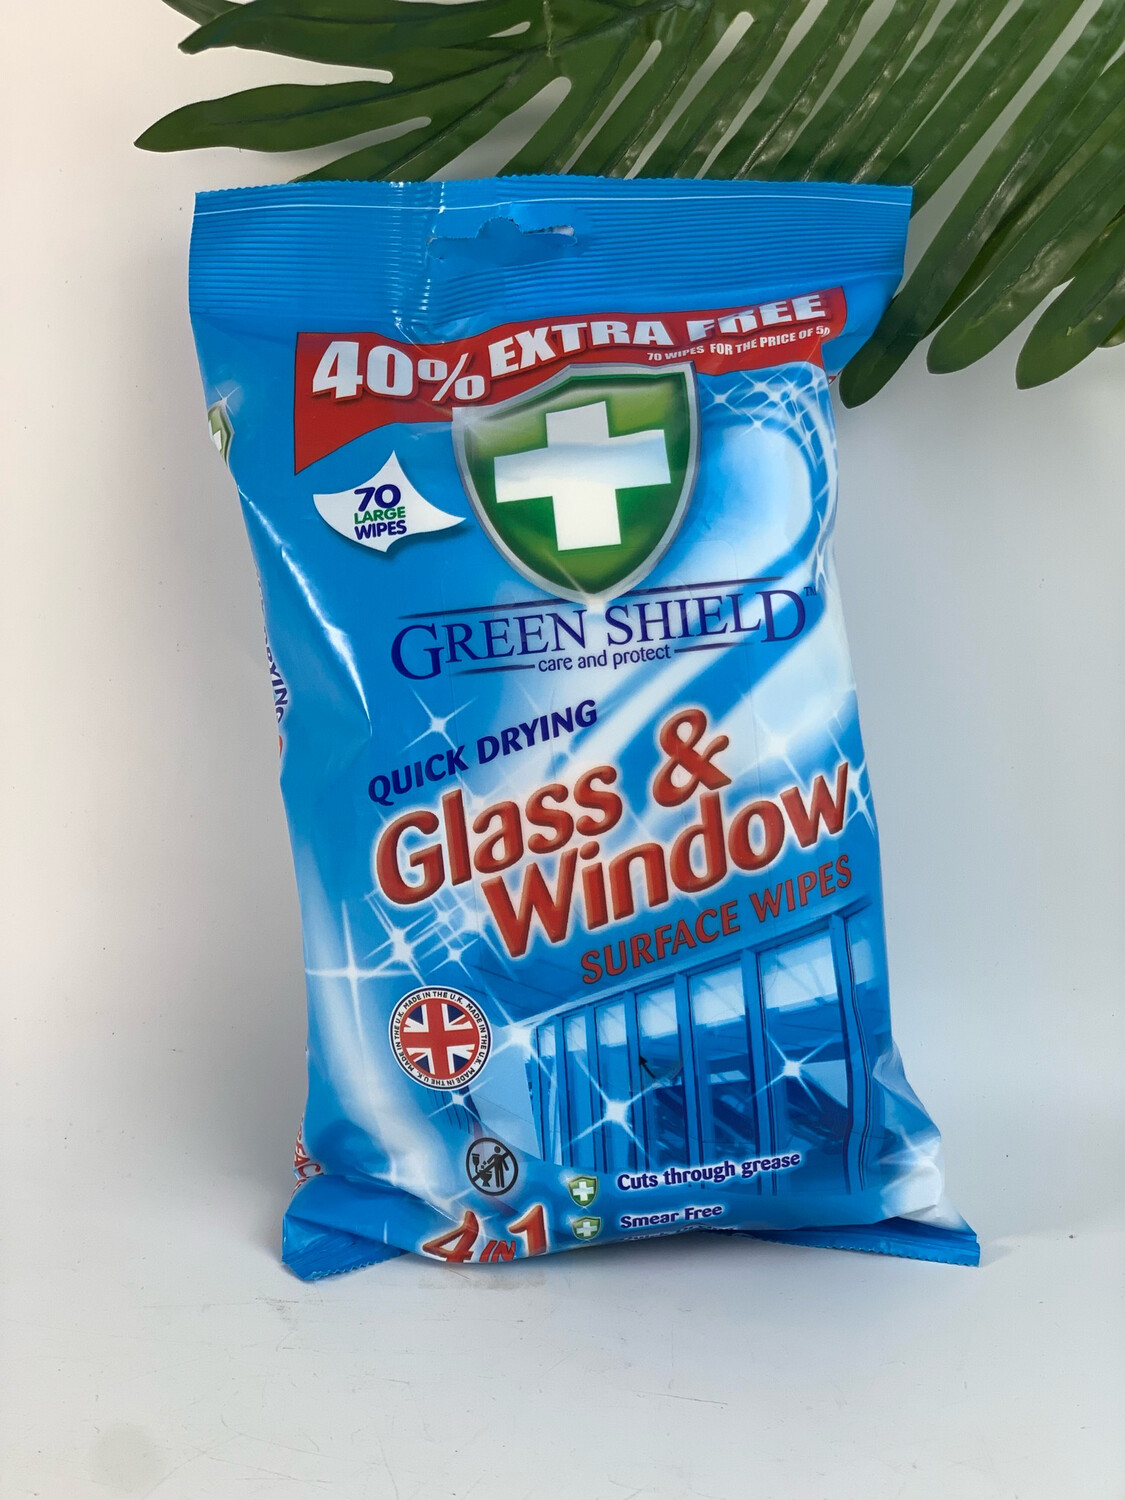 Glass & Window Surface Wipes 70 Pieces